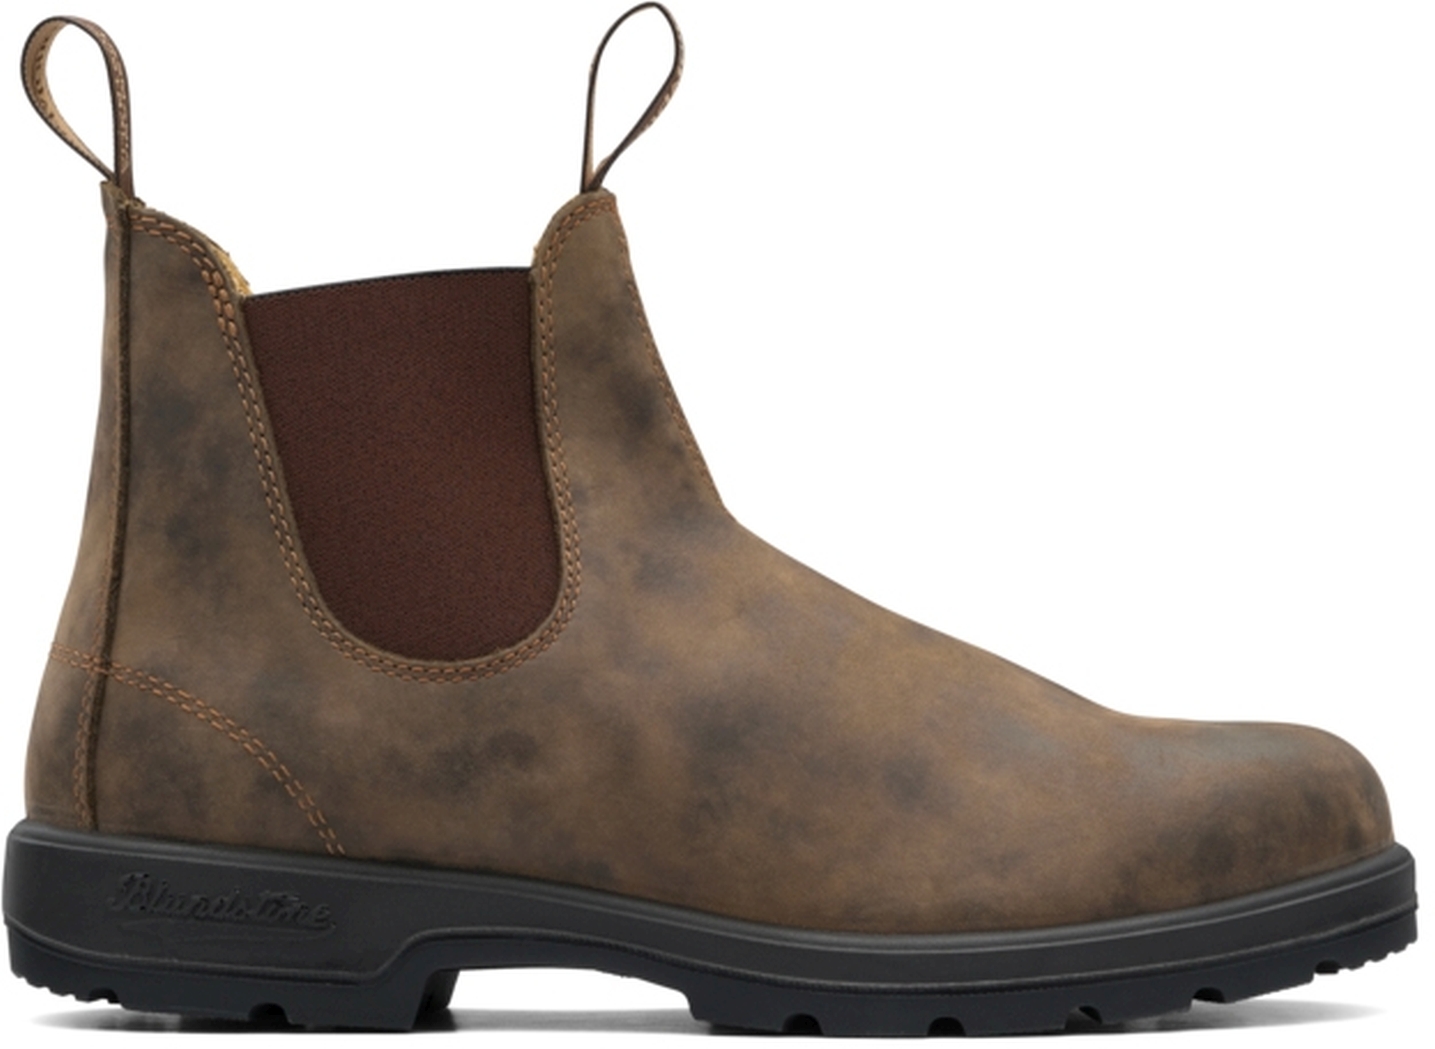 Blundstone Blundstone 585 Rustic Brown Leather (550 Series) Calf leather